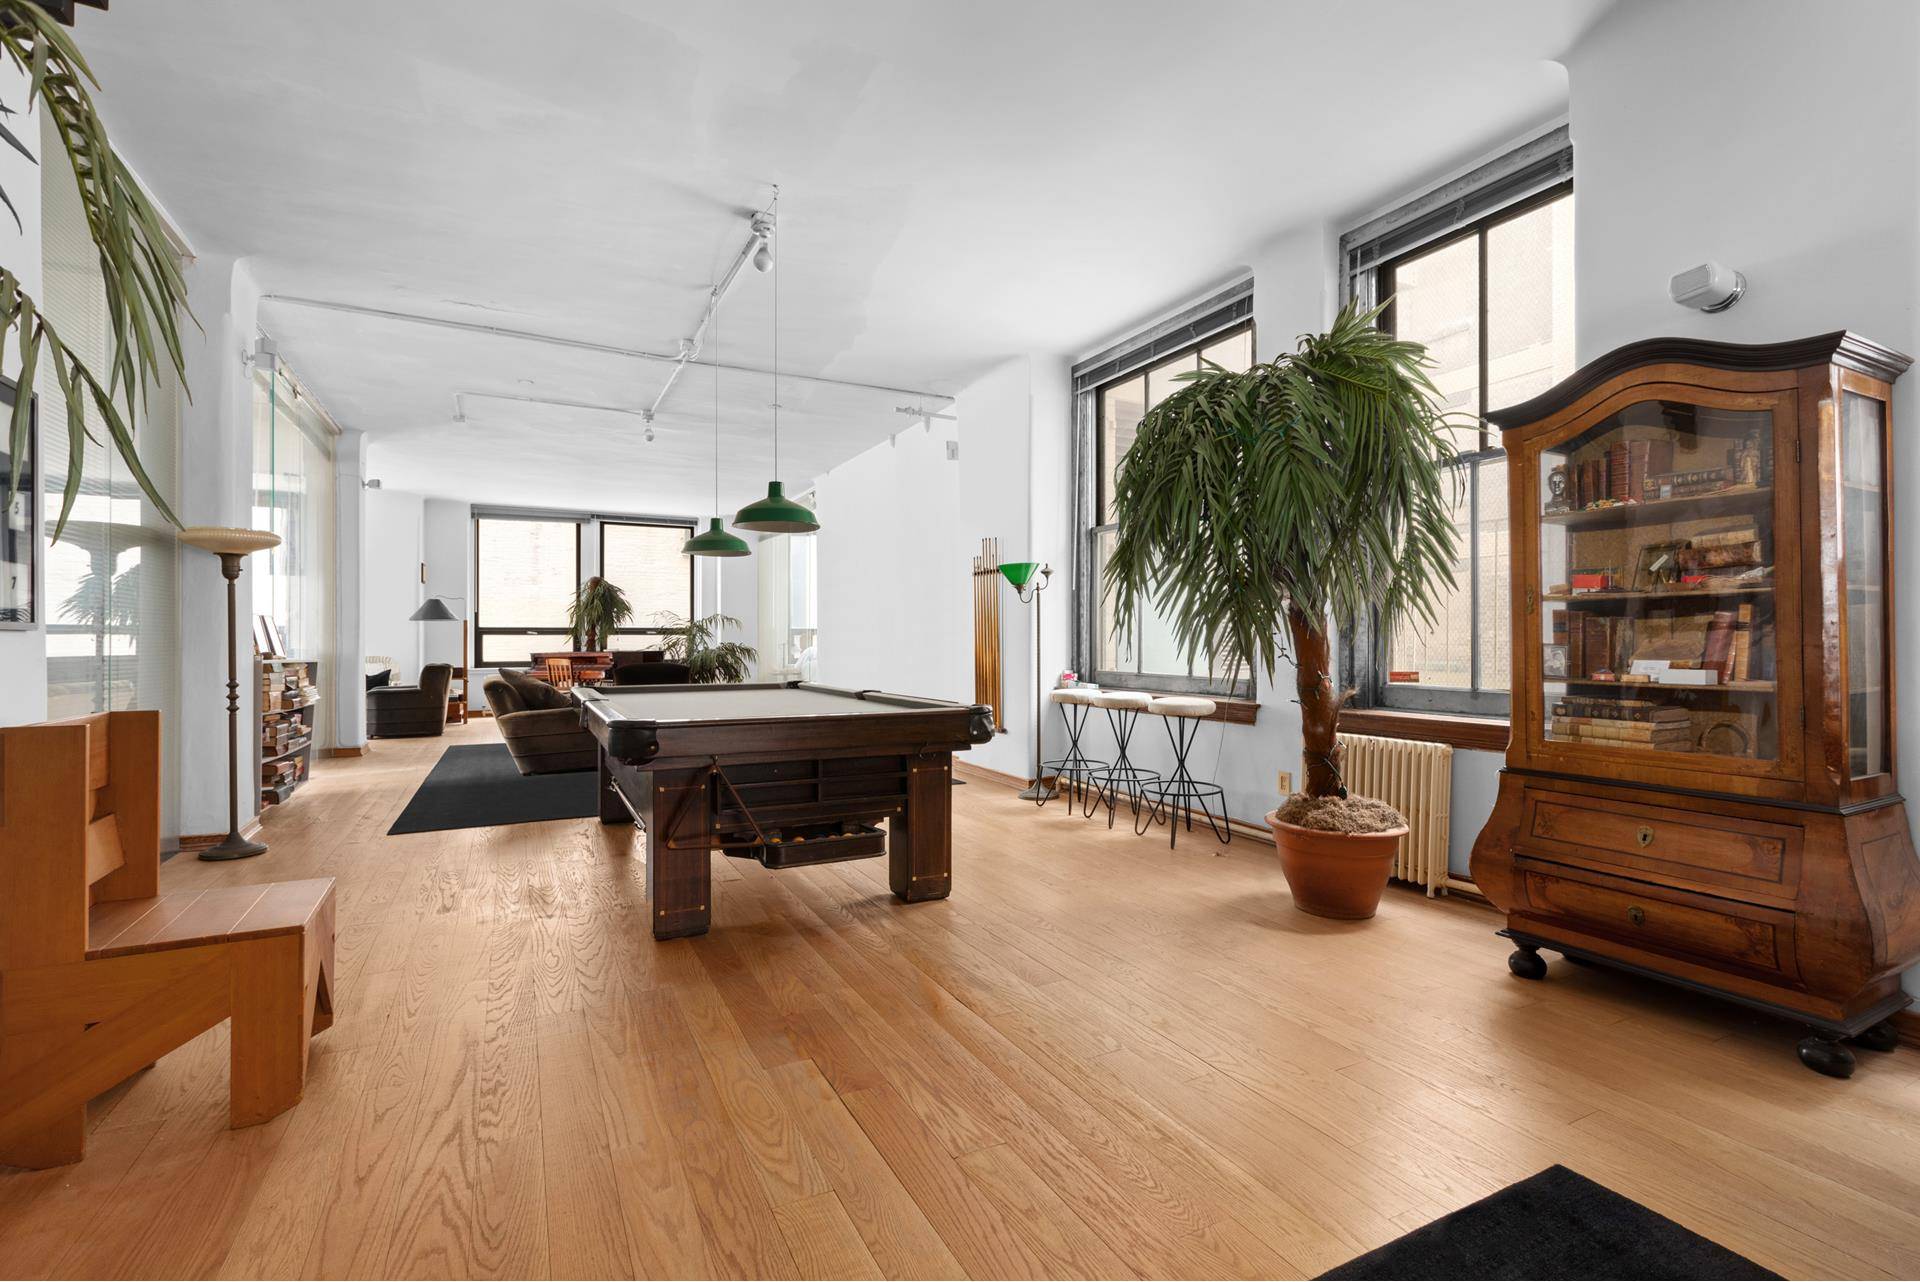 Discover a rare find at 50 Pine Street, Apartment 10 a genuine old school artist's loft tucked away on a quiet street in Manhattan's historic Financial District.